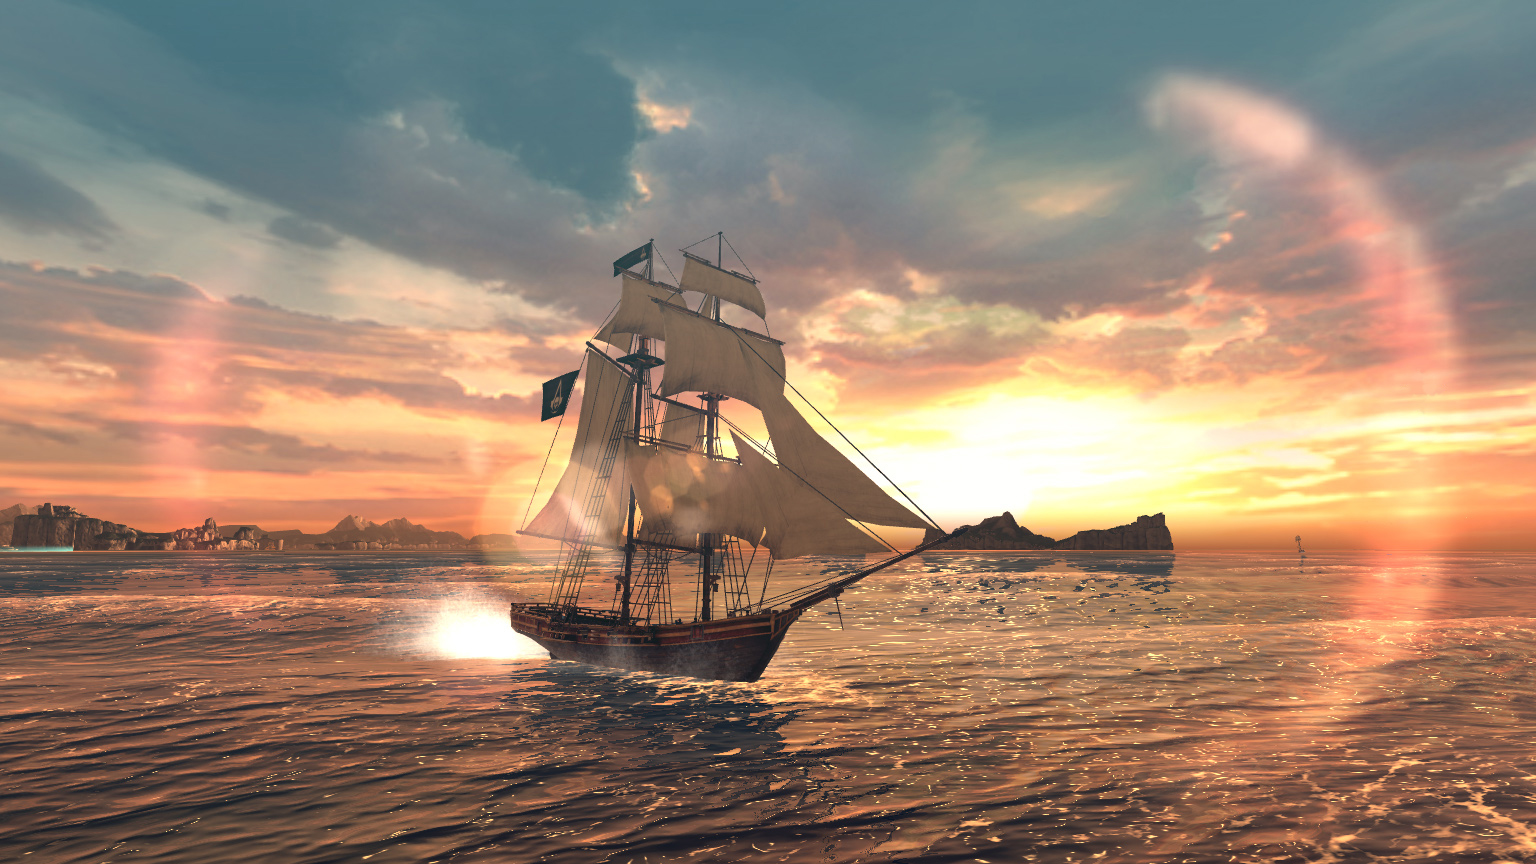 ‘Assassin’s Creed Pirates’ Set To Launch Next Week On iOS